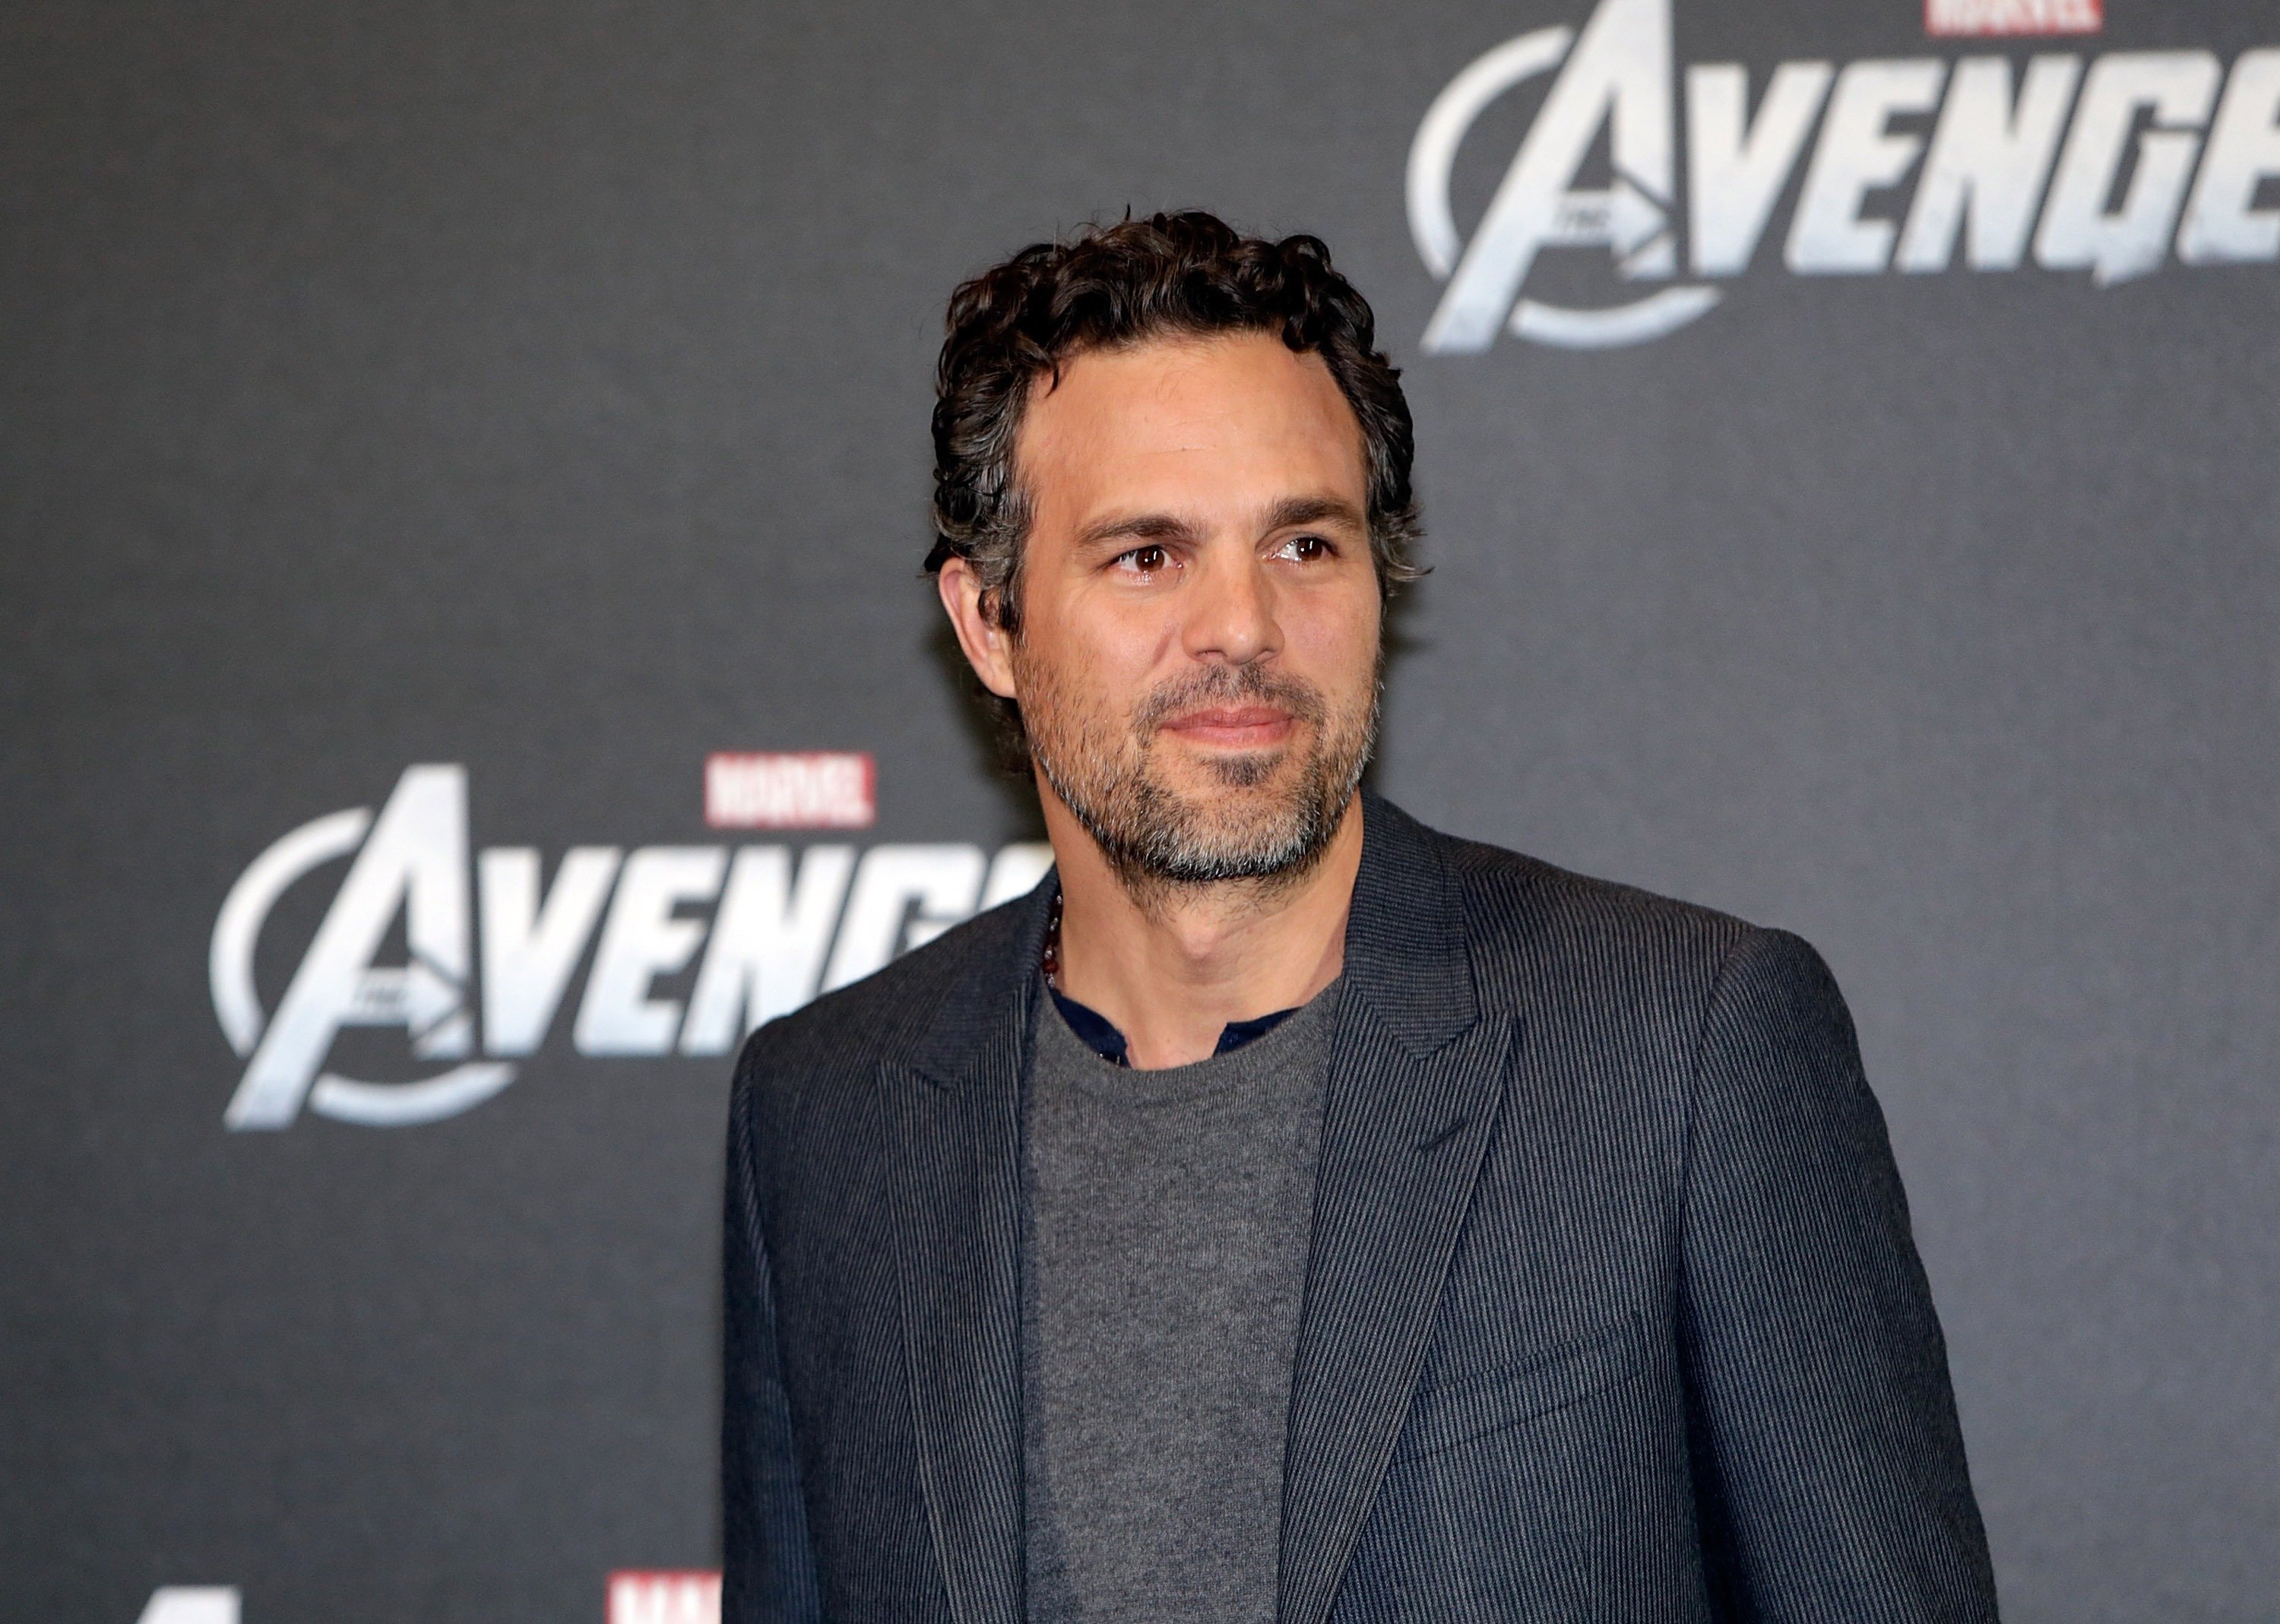 Mark Ruffalo during a 2012 photo call event in Berlin. | Photos: Getty Images